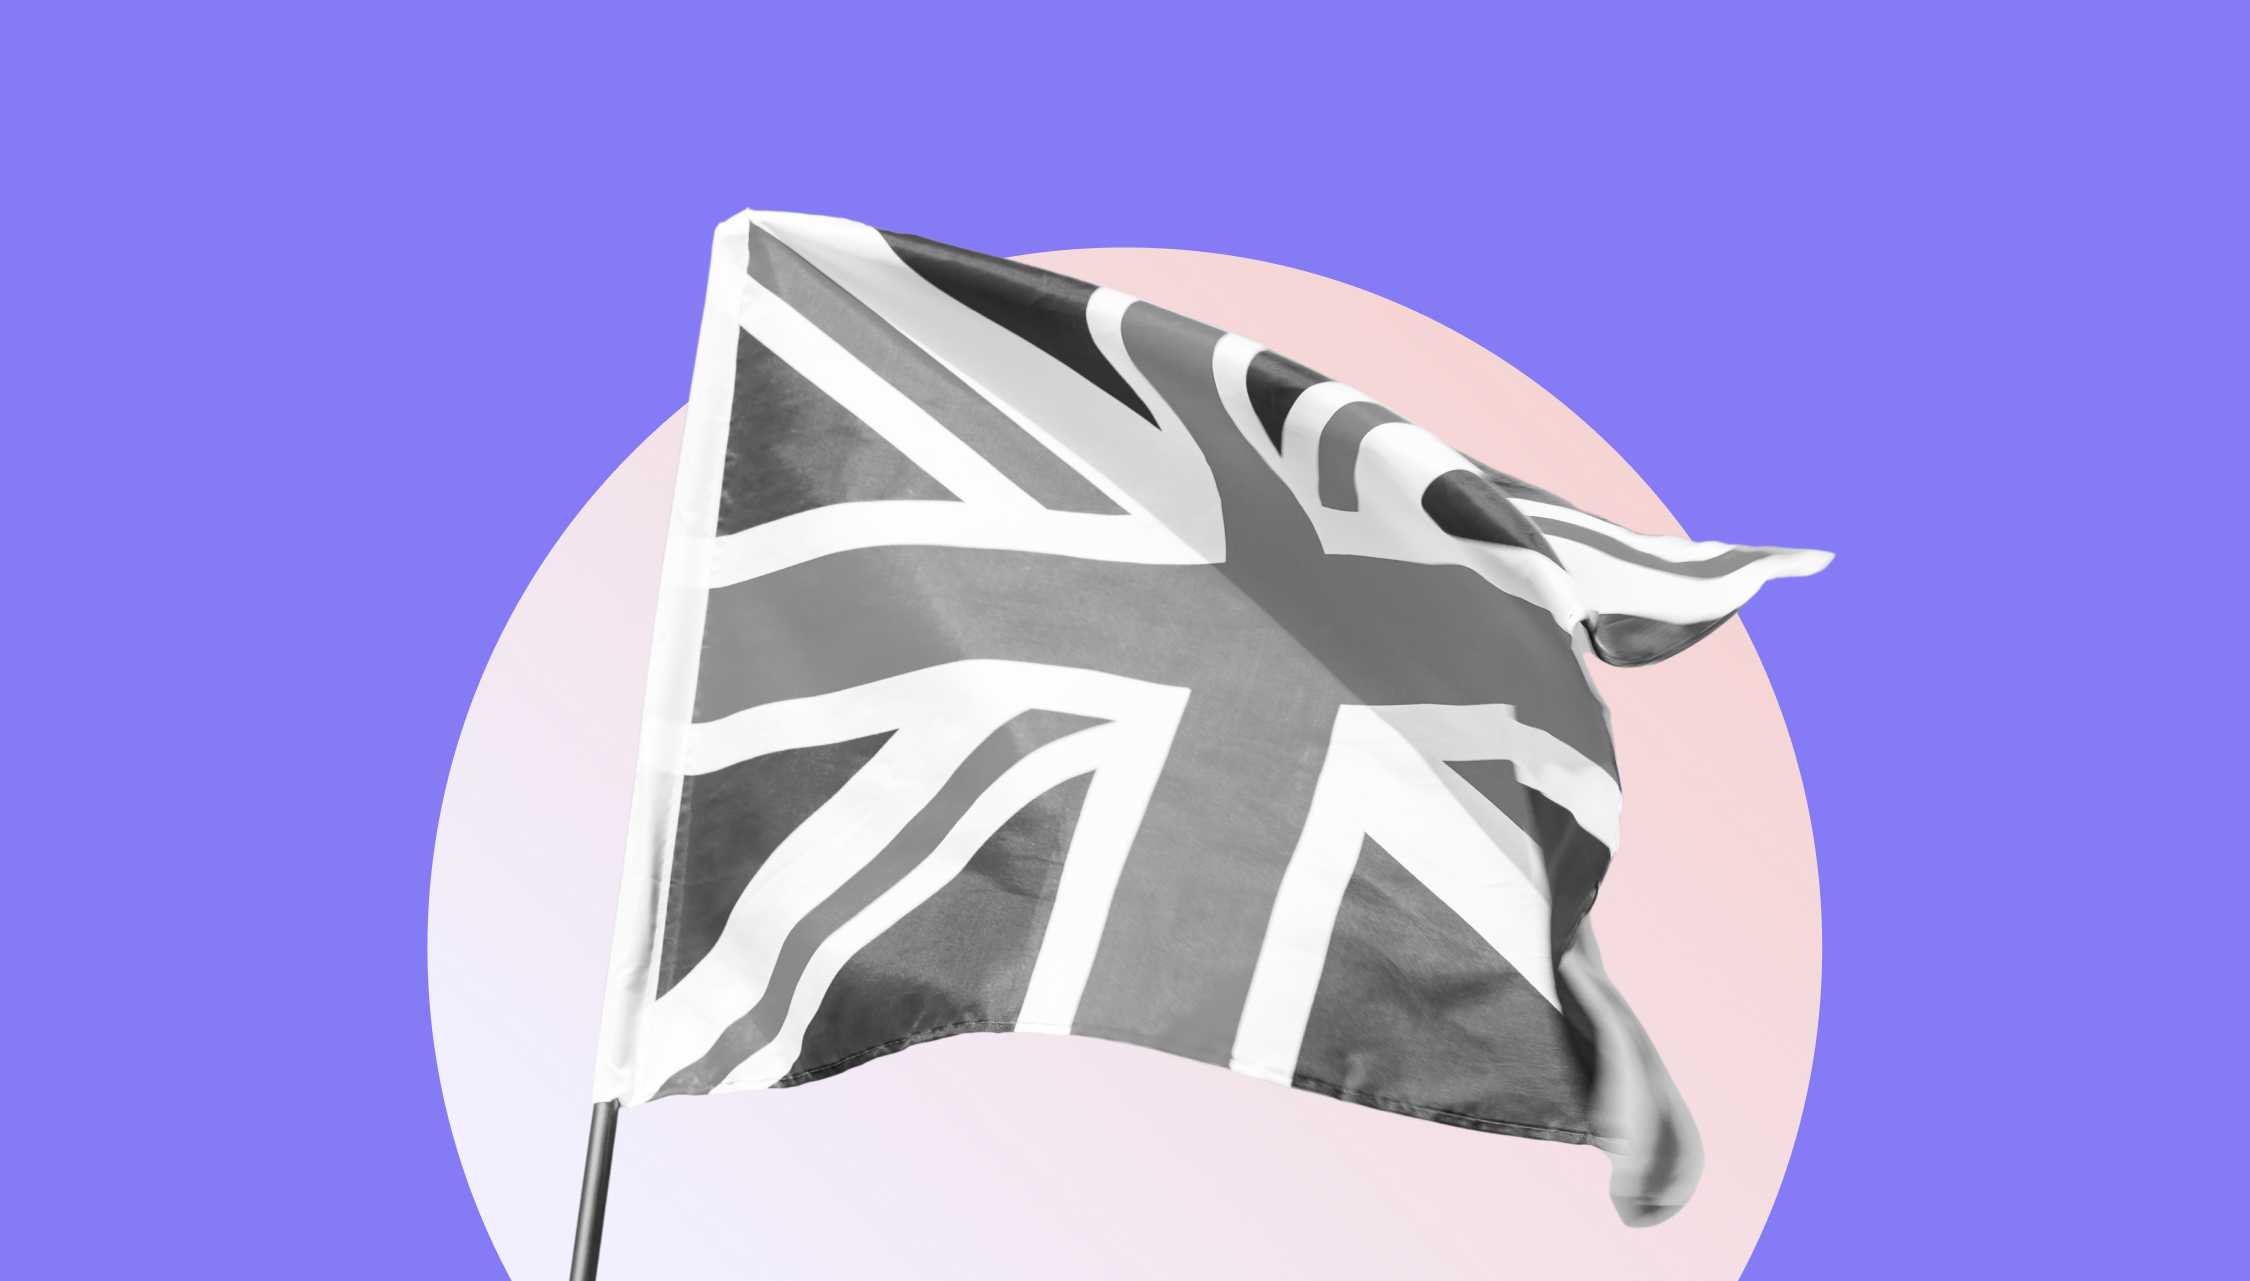 UK flag on a circle with purple background